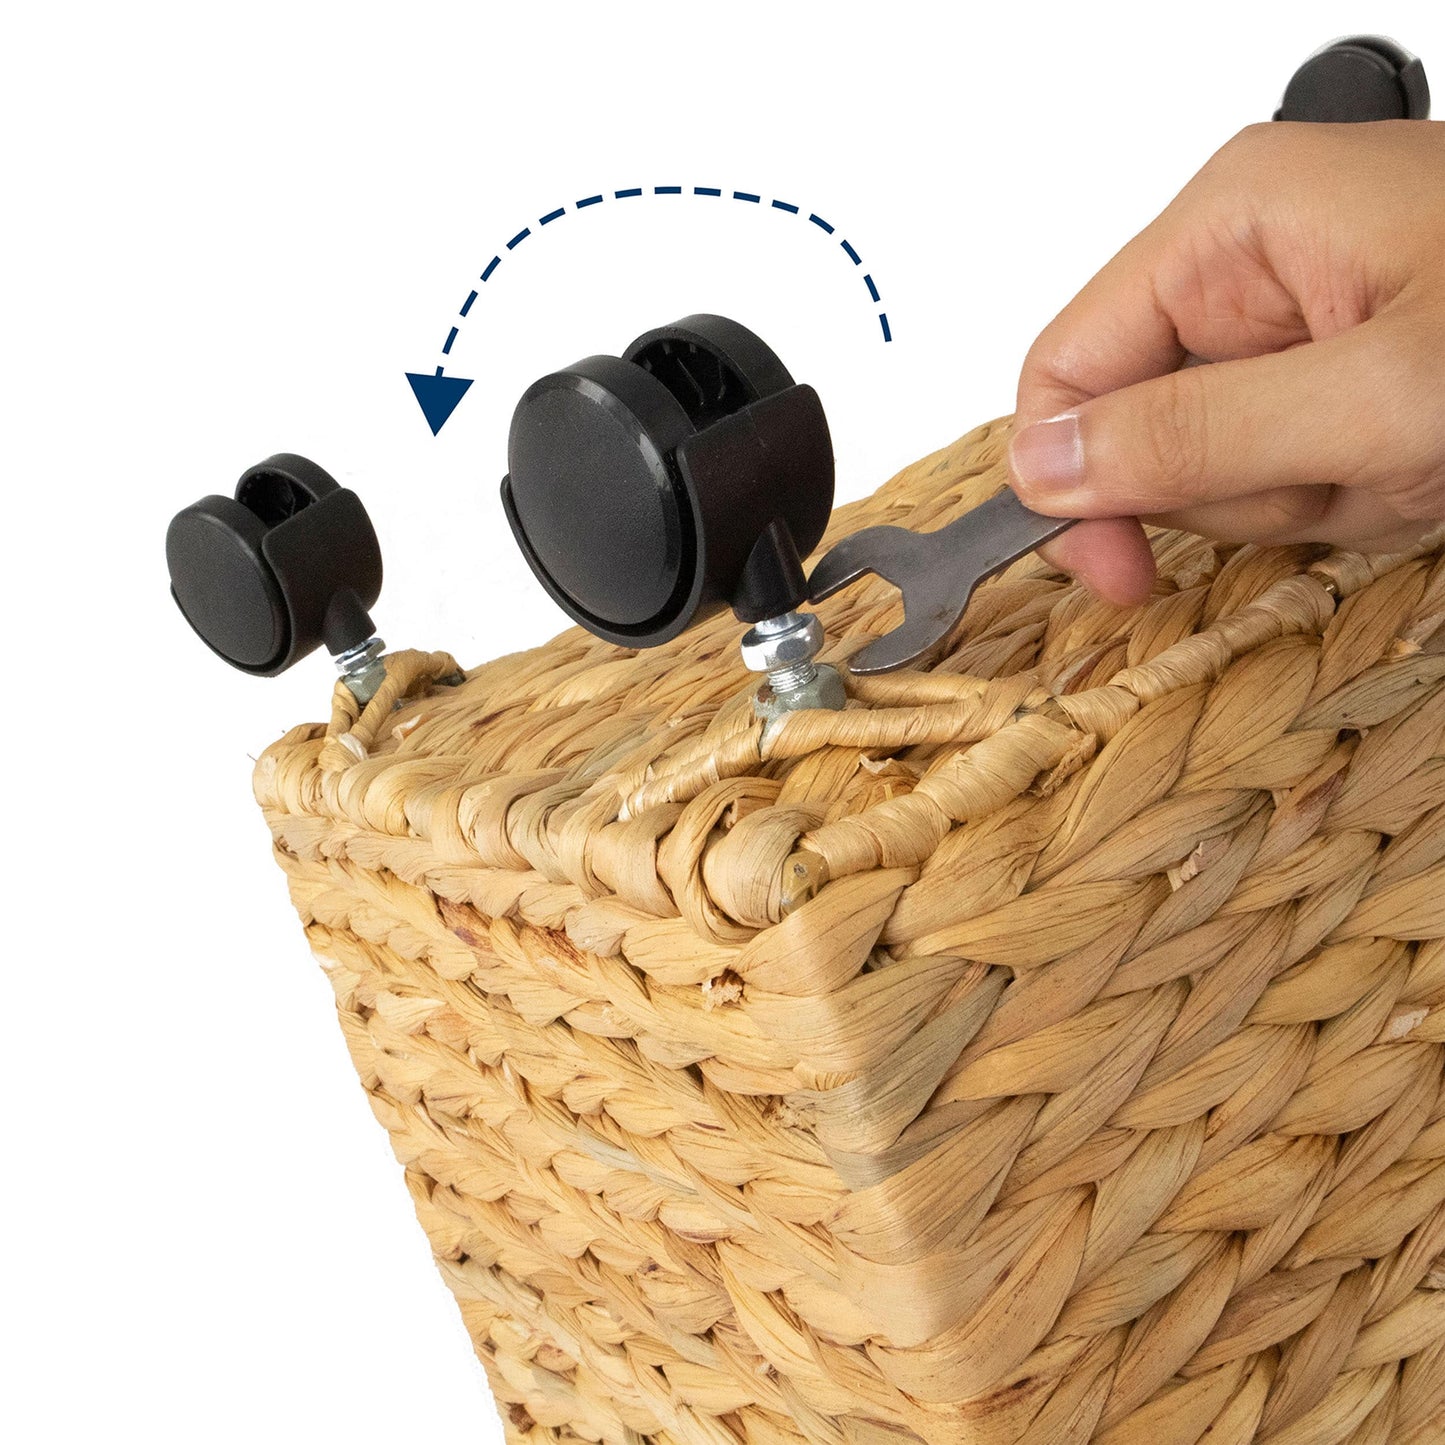 Woven Wicker Storage Baskets with Wheels | Decorative Baskets for Shelves (Set 3)